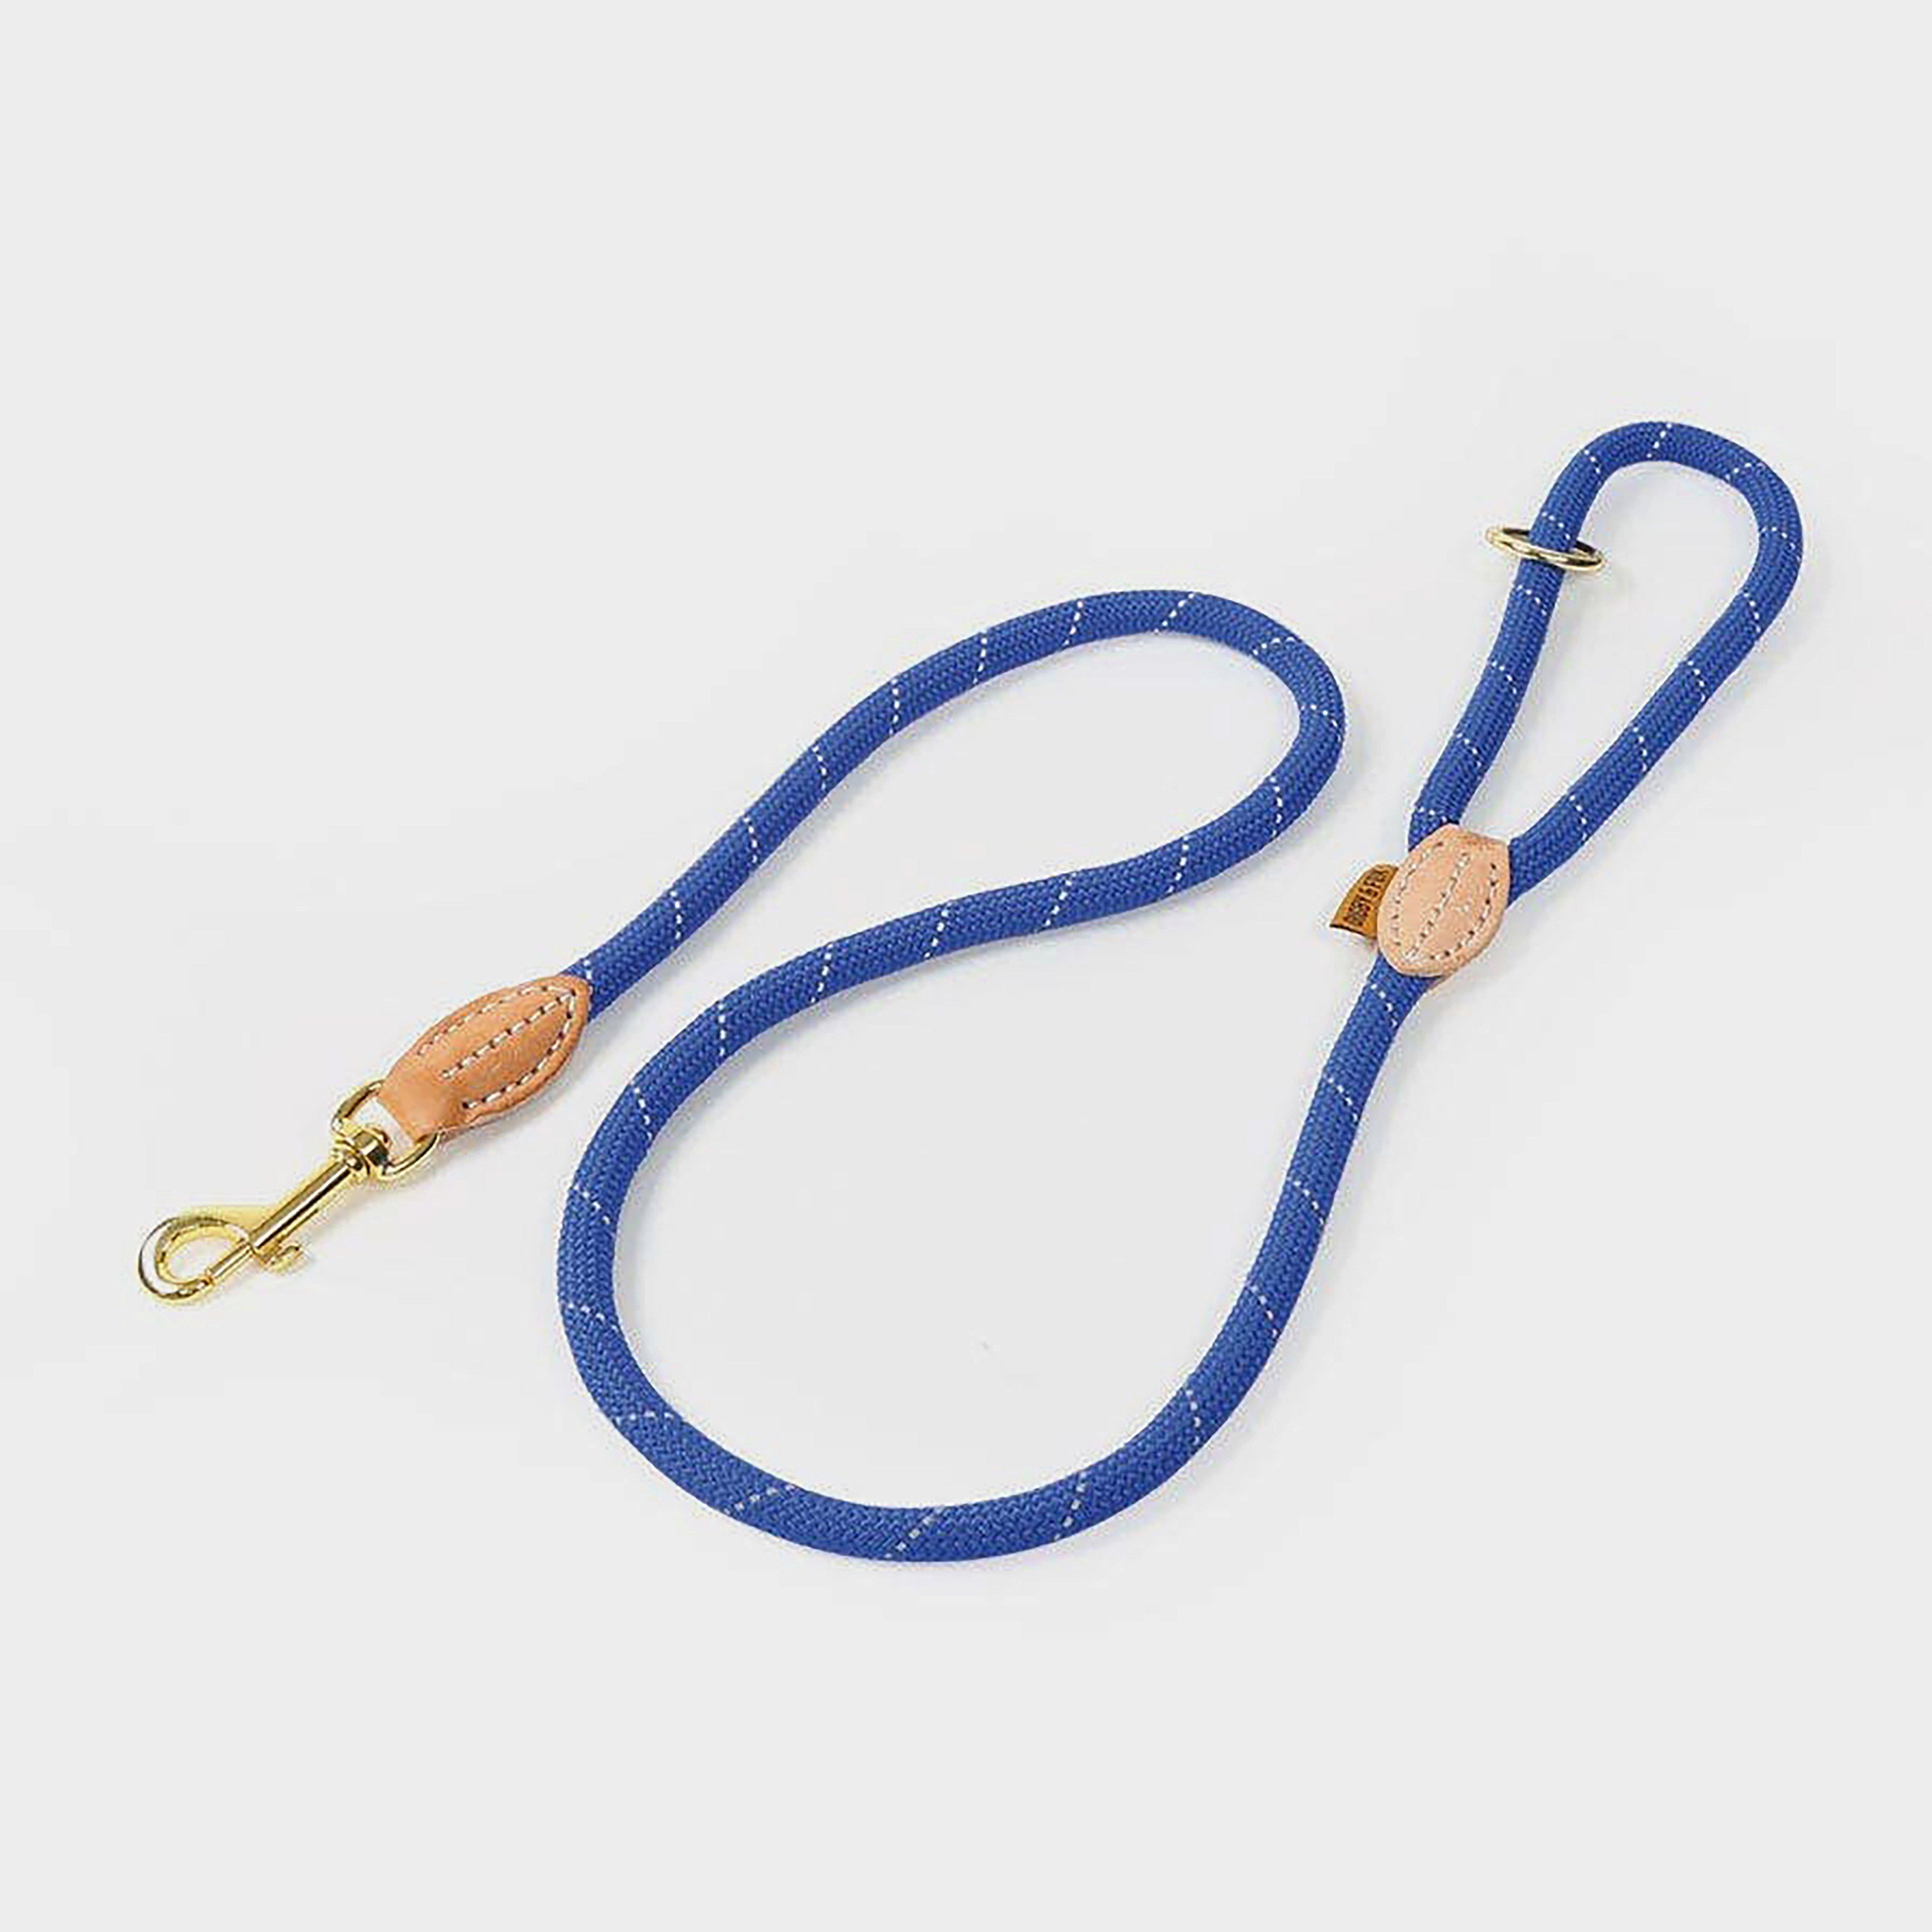 Image of Shires Digby & Fox Reflective Dog Lead - Blue/Blue, BLUE/BLUE